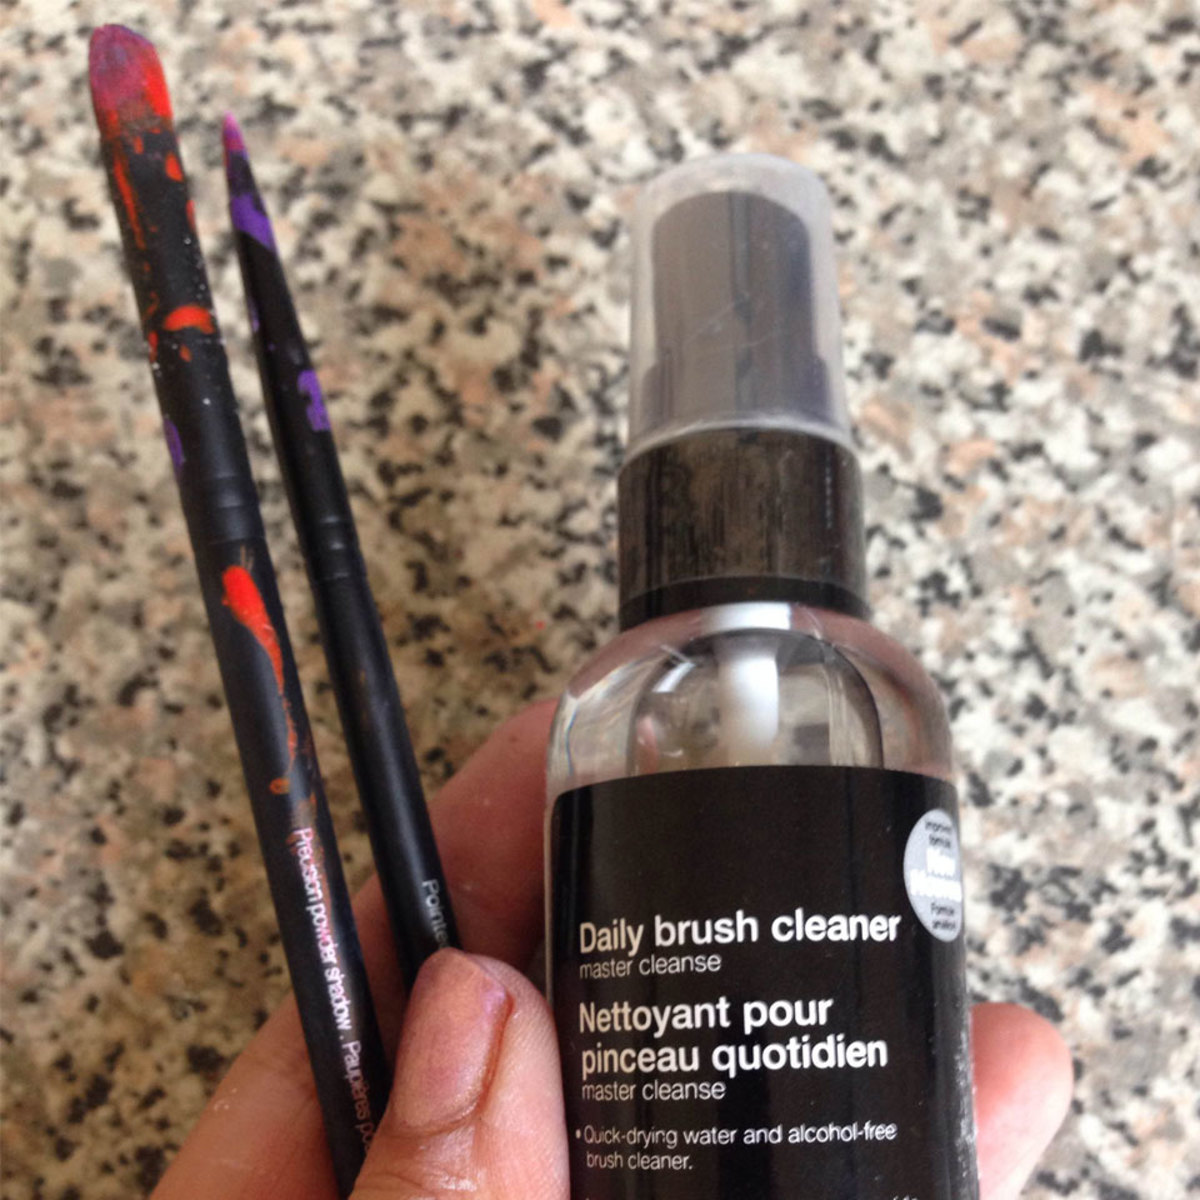 Clean your makeup brushes with brush cleaner.